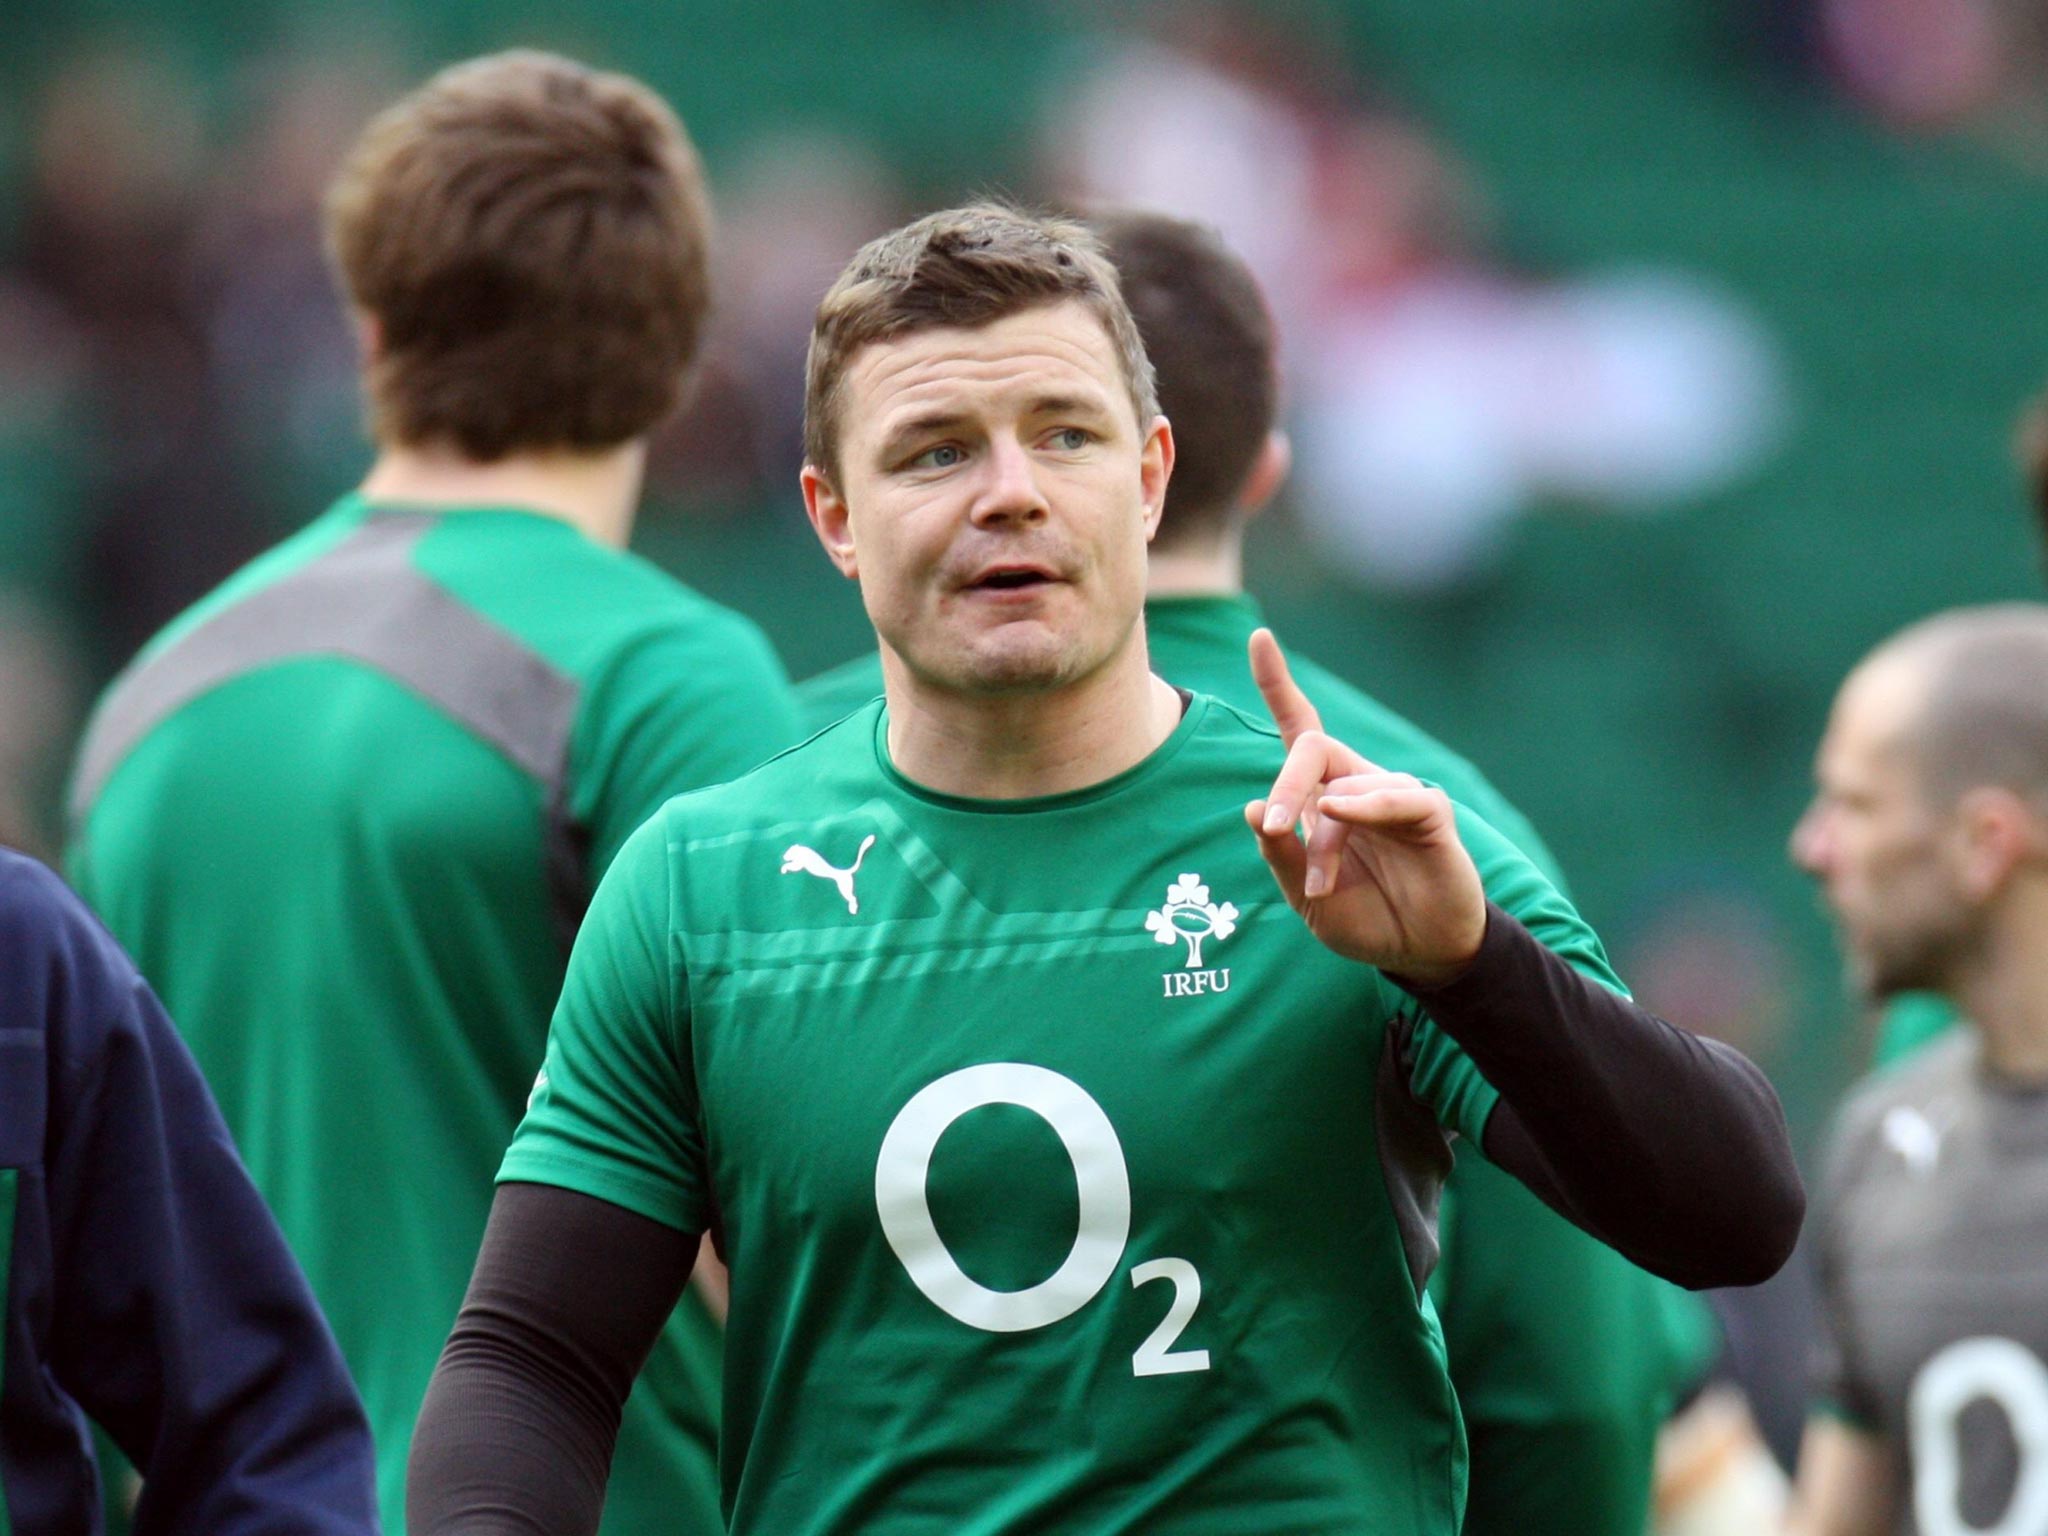 Brian O’Driscoll will break the record for Test caps in his final
Ireland match in Dublin today